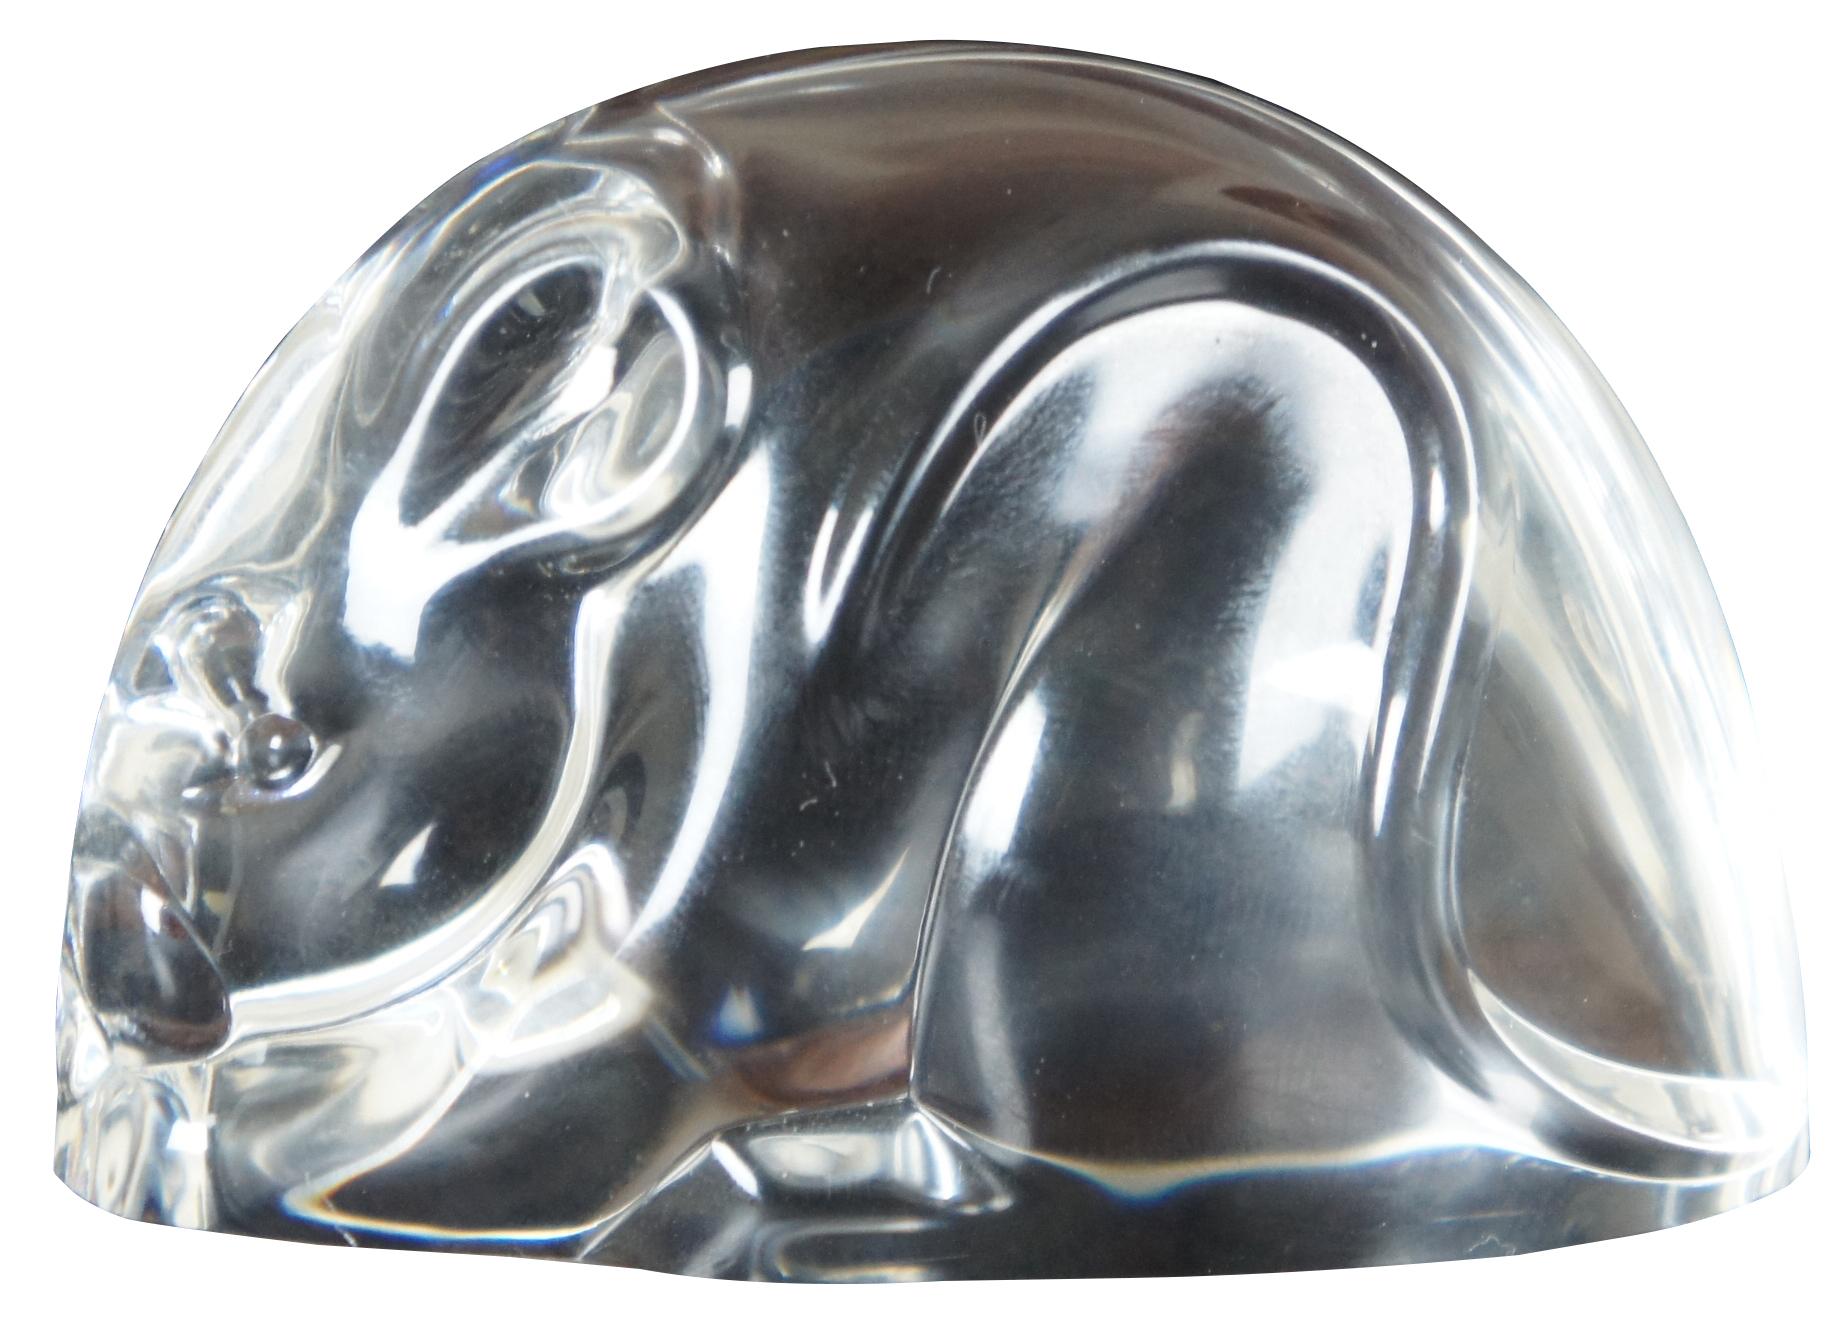 Steuben glass mouse shaped hand cooler or paperweight, includes original box.
 